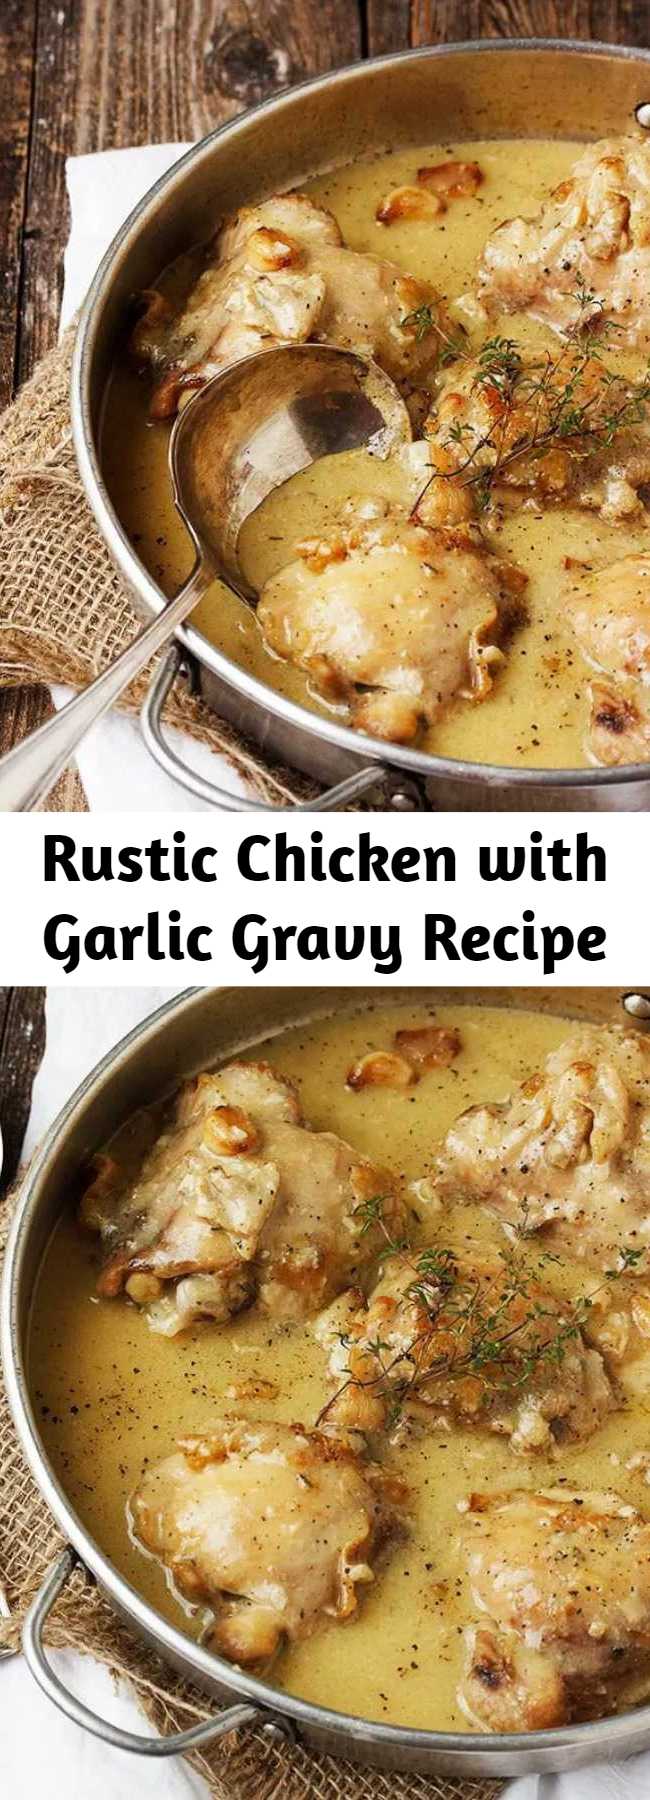 Rustic Chicken with Garlic Gravy Recipe - A delicious one-pan meal that is delicious served with mashed potatoes, rice or pasta, to make the most of the delicious gravy. To save yourself the chore of separating and peeling all that garlic, look for pre-separated/peeled garlic cloves in the produce section of your grocery store. #chicken #onepan #garlic